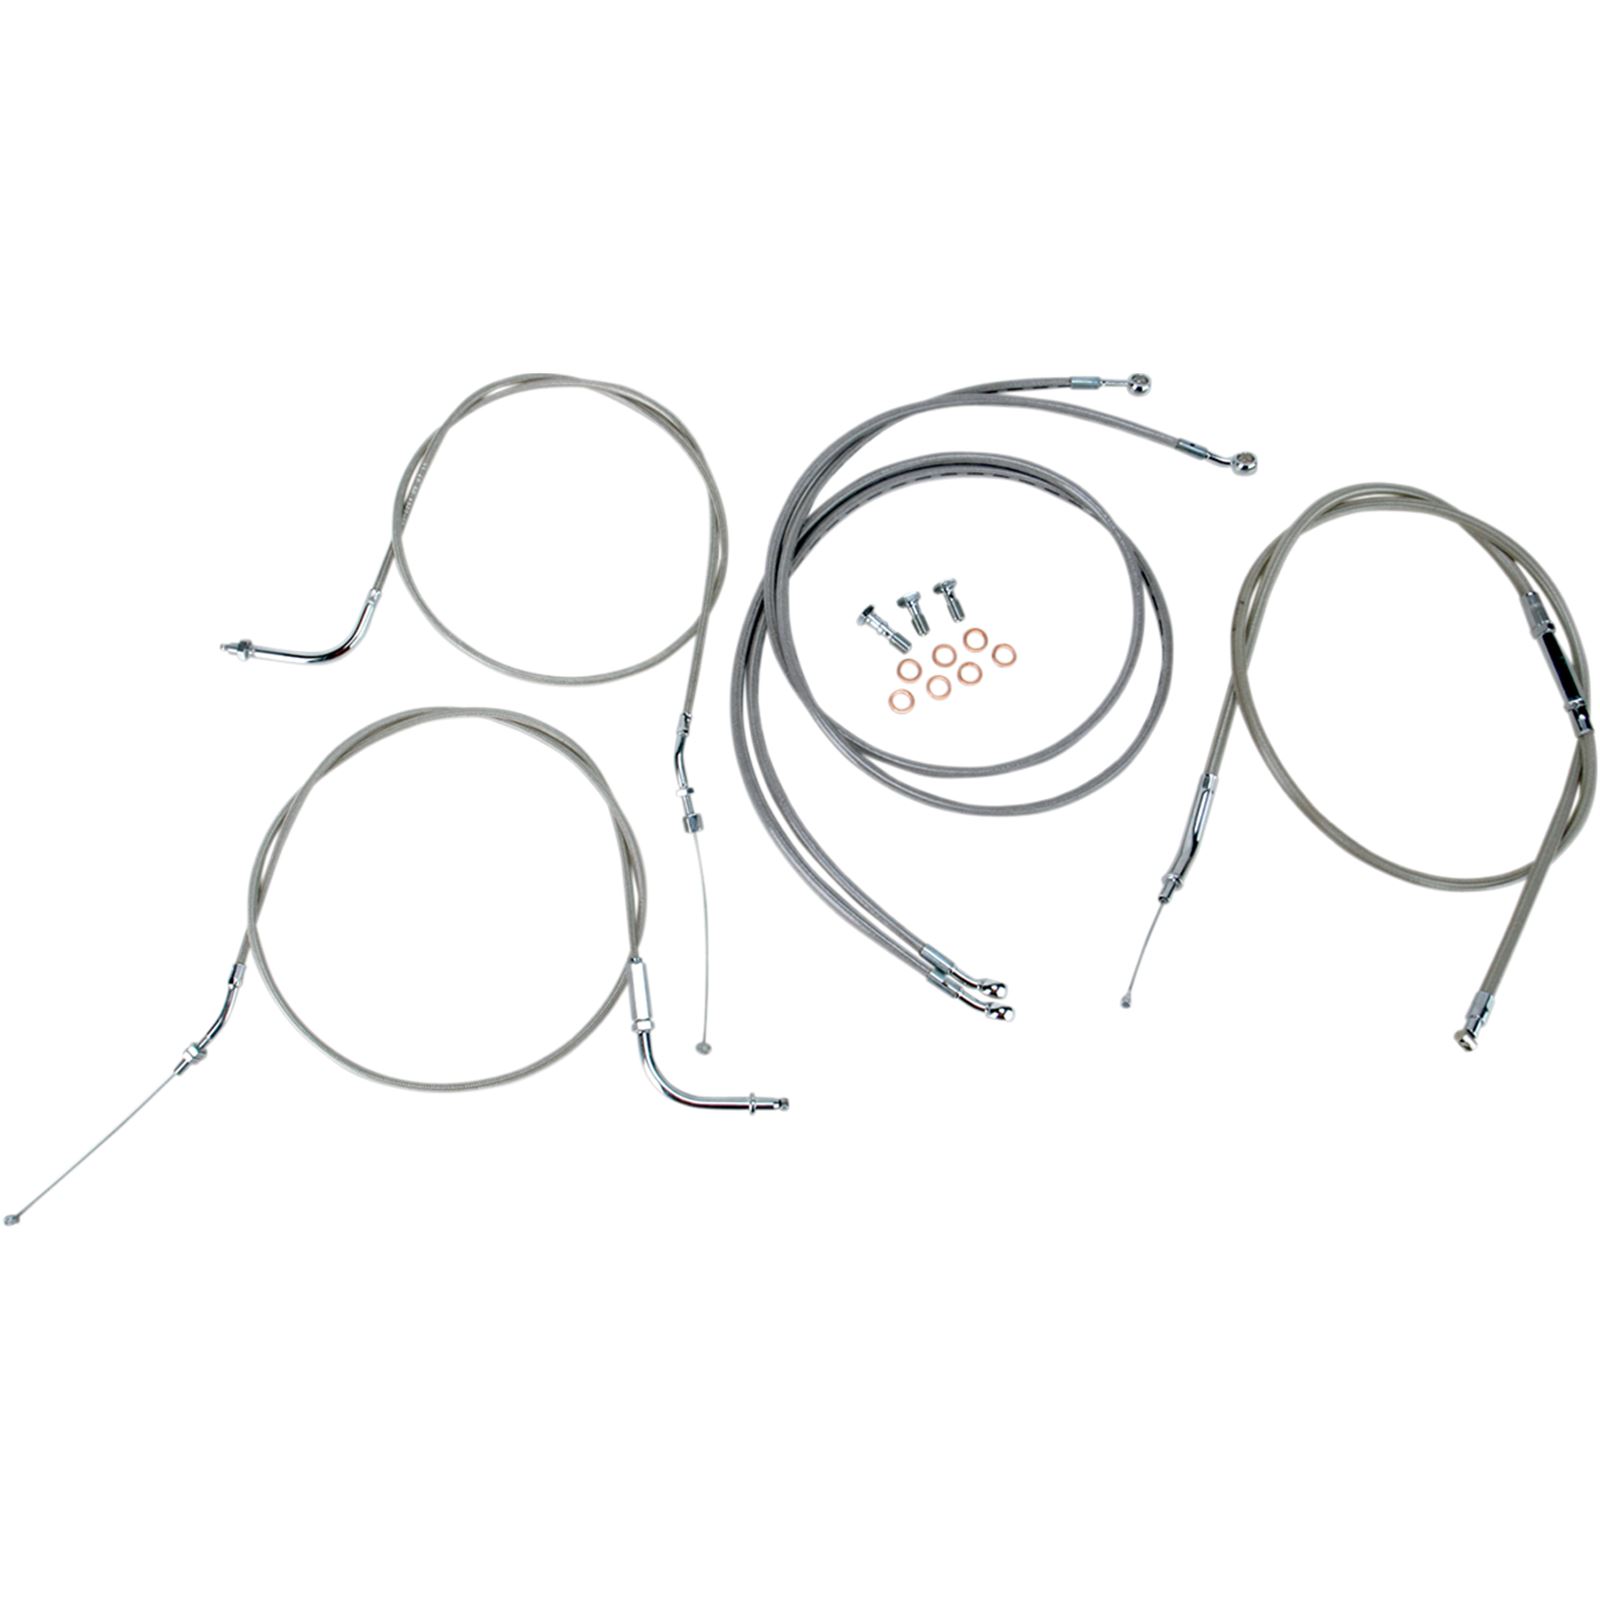 Baron Custom Accessories 12" Cable Line Kit for '04 - '08 Roadstar